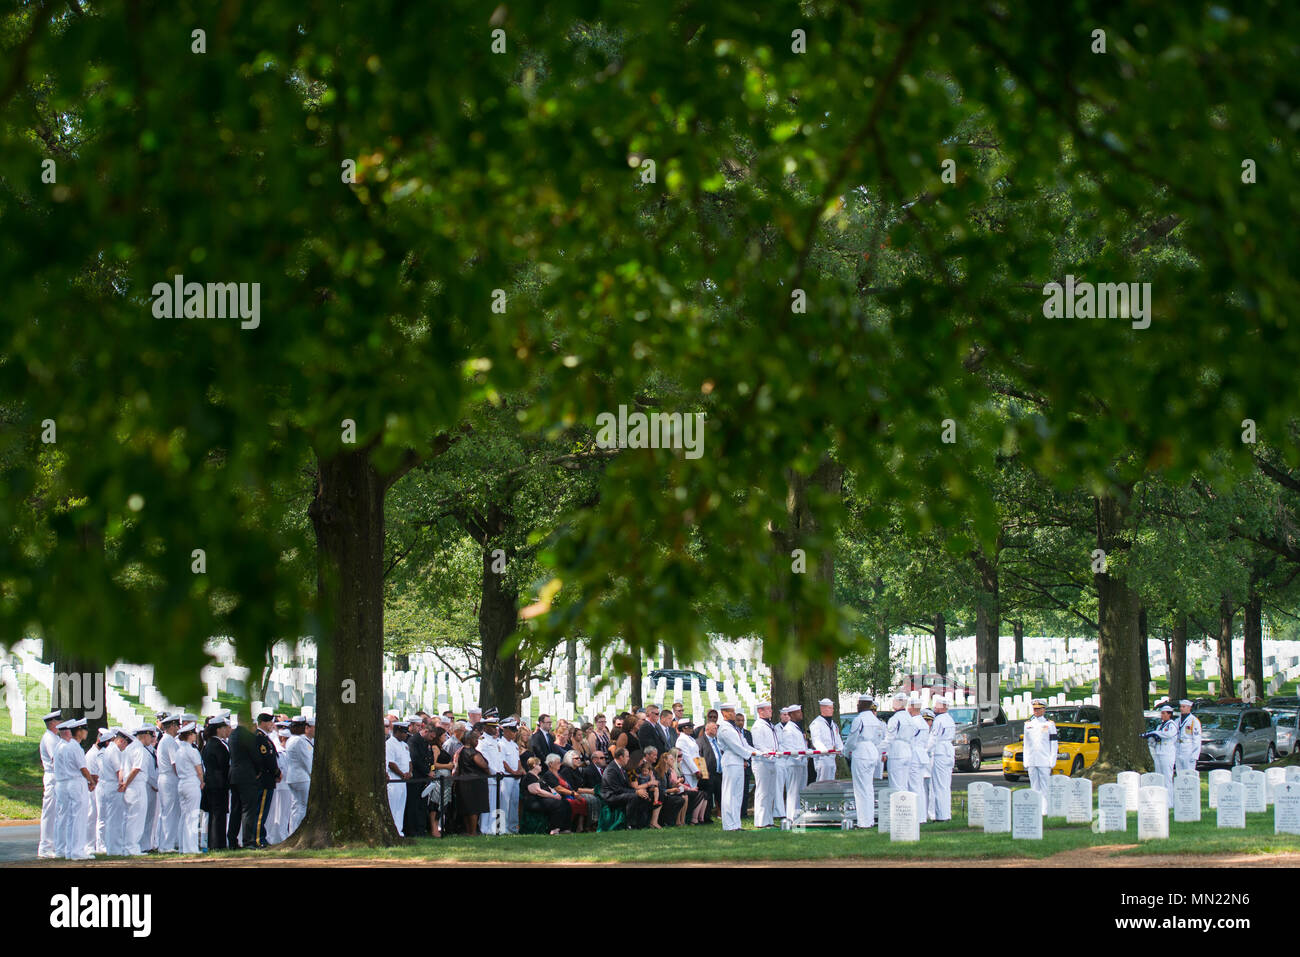 The U.S. Navy Ceremonial Guard participates in the graveside service for U.S. Navy Fire Controlman Chief Gary Leo Rehm Jr. at Arlington National Cemetery, Arlington, Va, Aug. 14, 2017.  Rehm perished when the USS Fitzgerald (DDG 62) was involved in a collision with the Philippine-flagged merchant vessel ACX Crystal on June 17, 2017.  U.S. Navy  posthumously promoted Rehm to Fire Controlman Chief in a ceremony earlier this week. (U.S. Army photo by Elizabeth Fraser / Arlington National Cemetery / released) Stock Photo